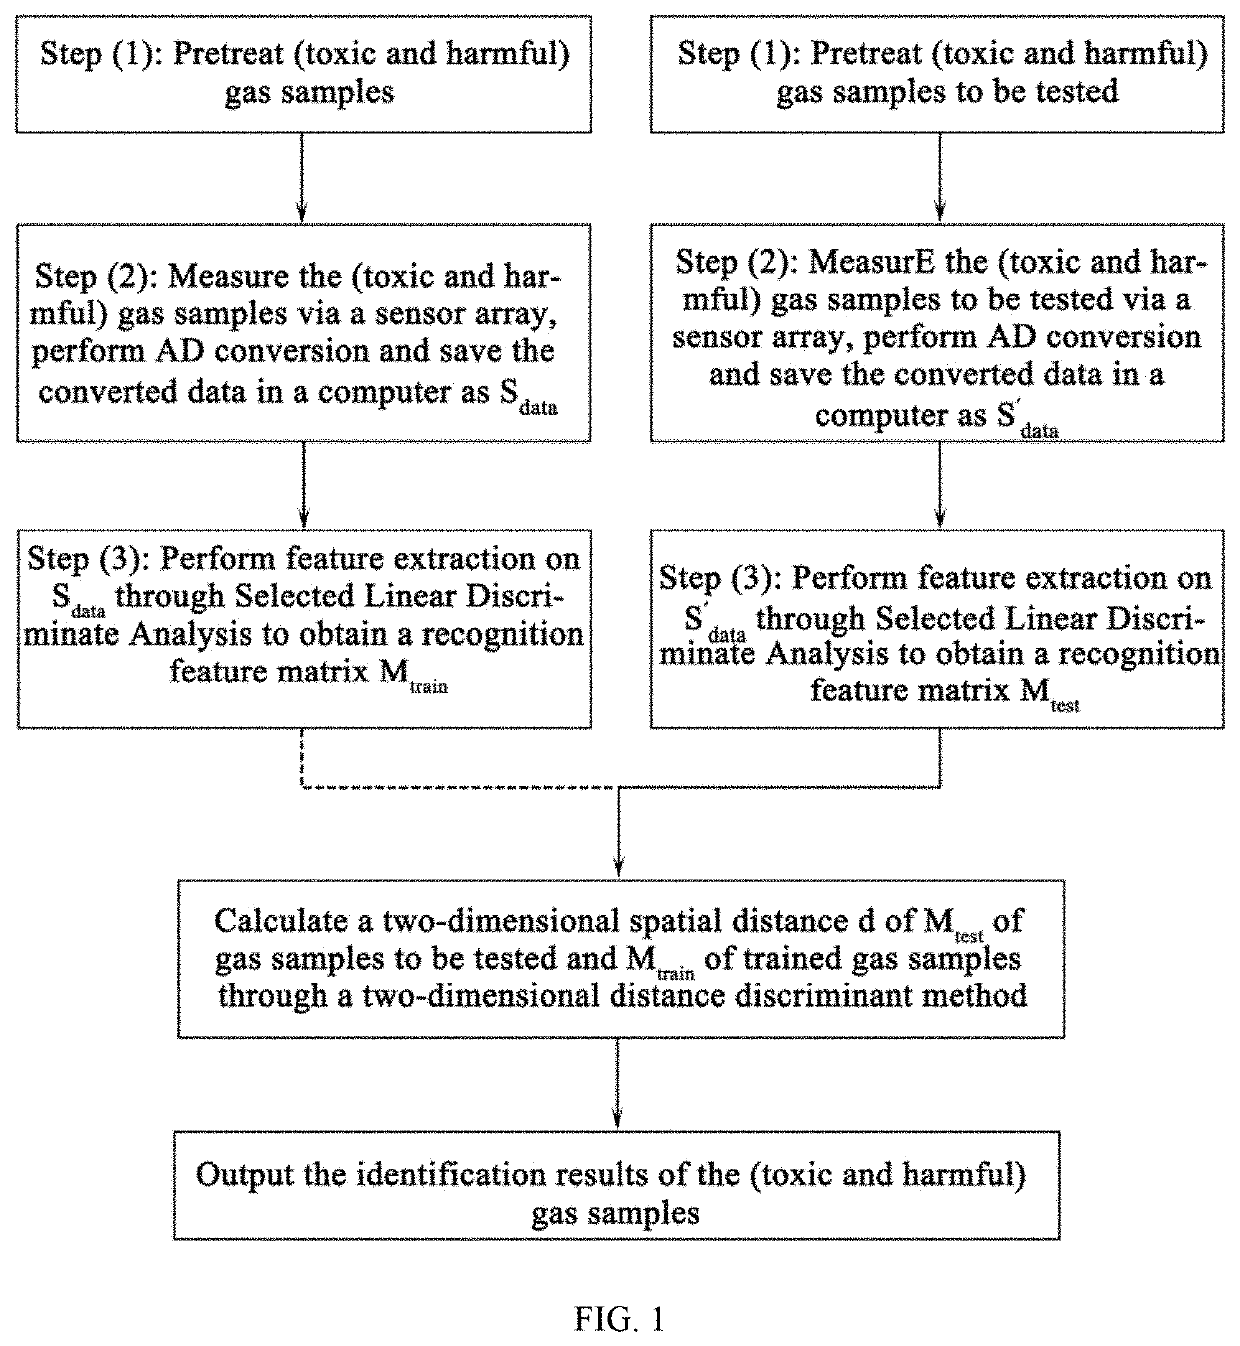 Method for detecting and identifying toxic and harmful gases based on machine olfaction